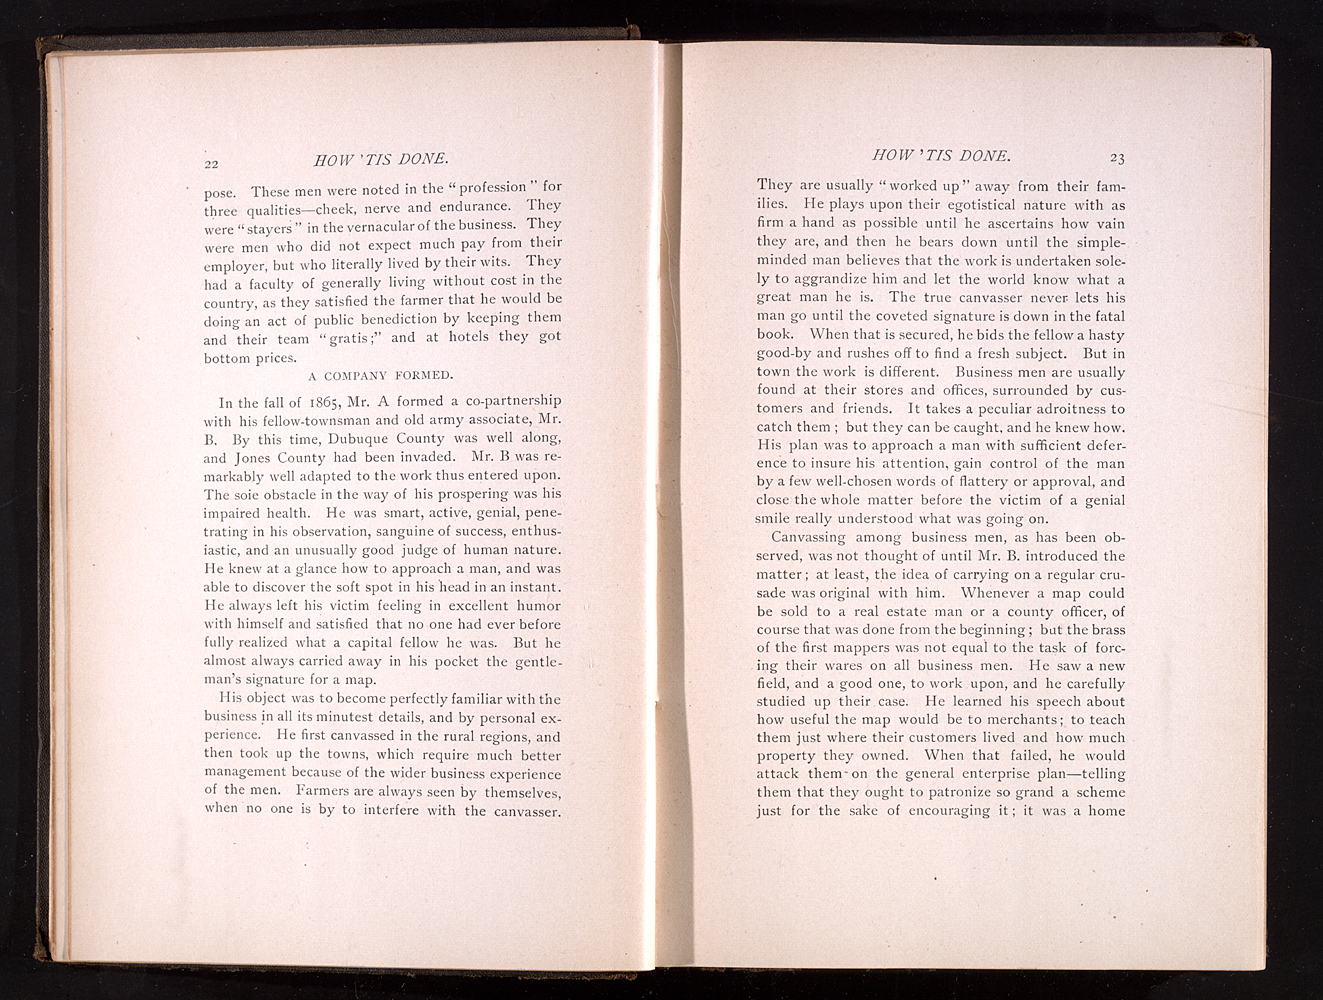 1890 Printing of How Tis Done Interior With Names Changed to Protect the Publisher